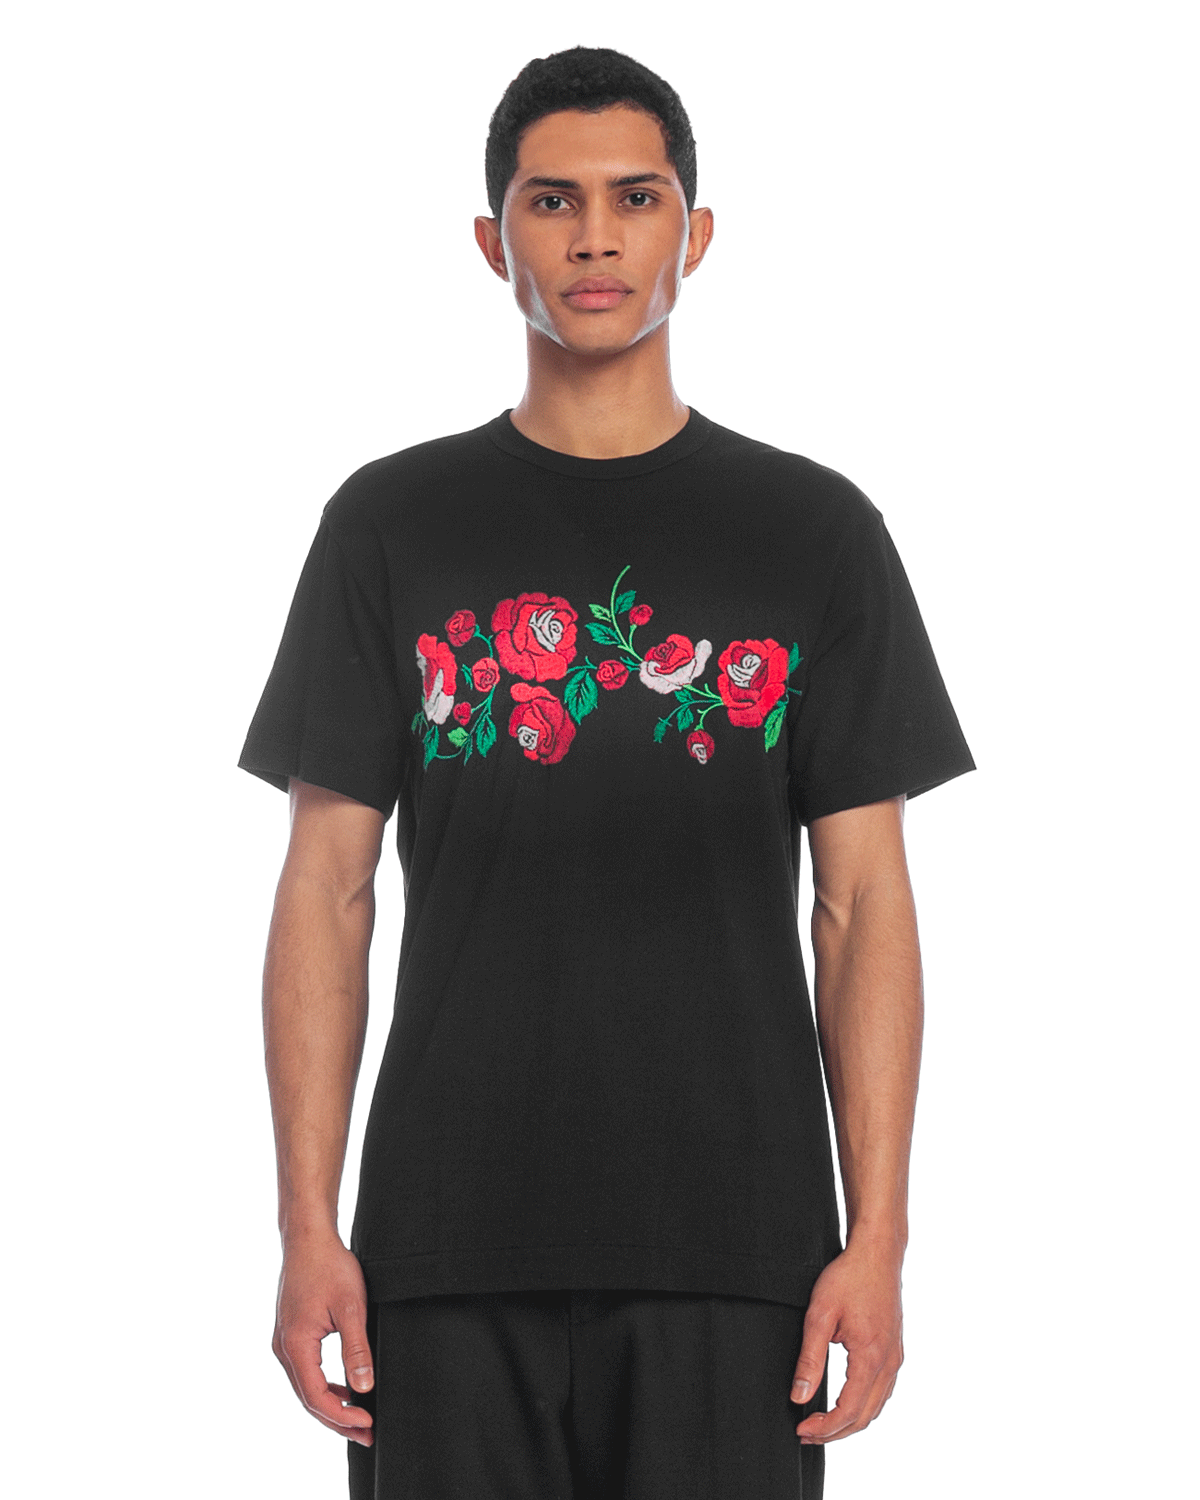 Roses Embroidery Tee Black